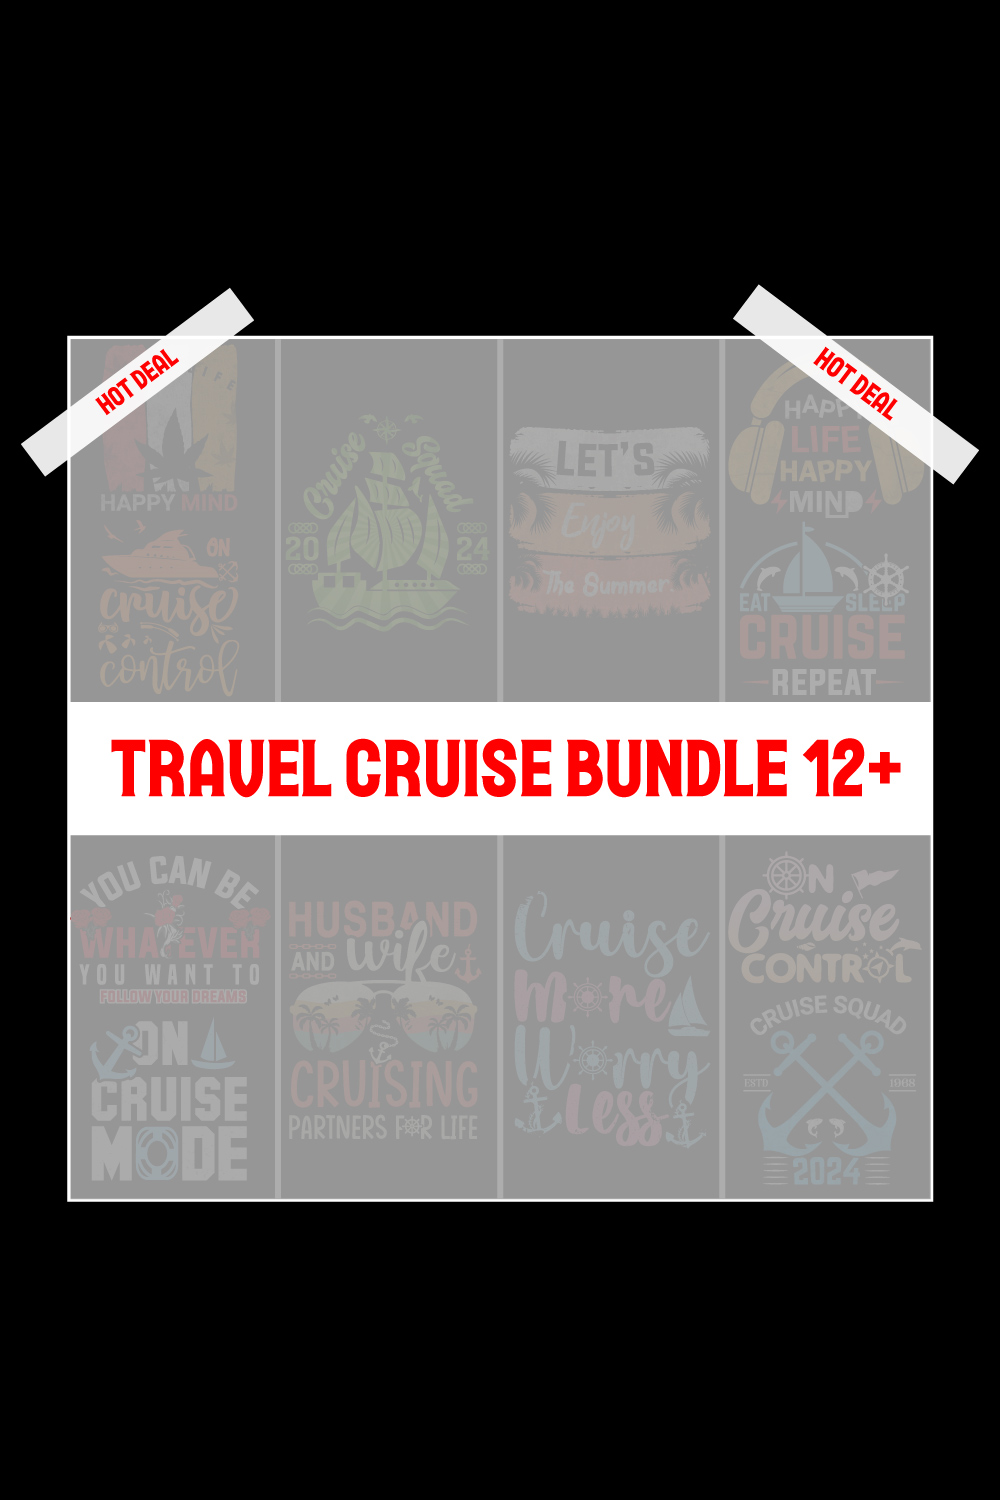 Cruise T-Shirt Design 12+Bundle- Cruise T-shirt Design- Travel cruise vector, illustration, silhouette, or graphics pinterest preview image.